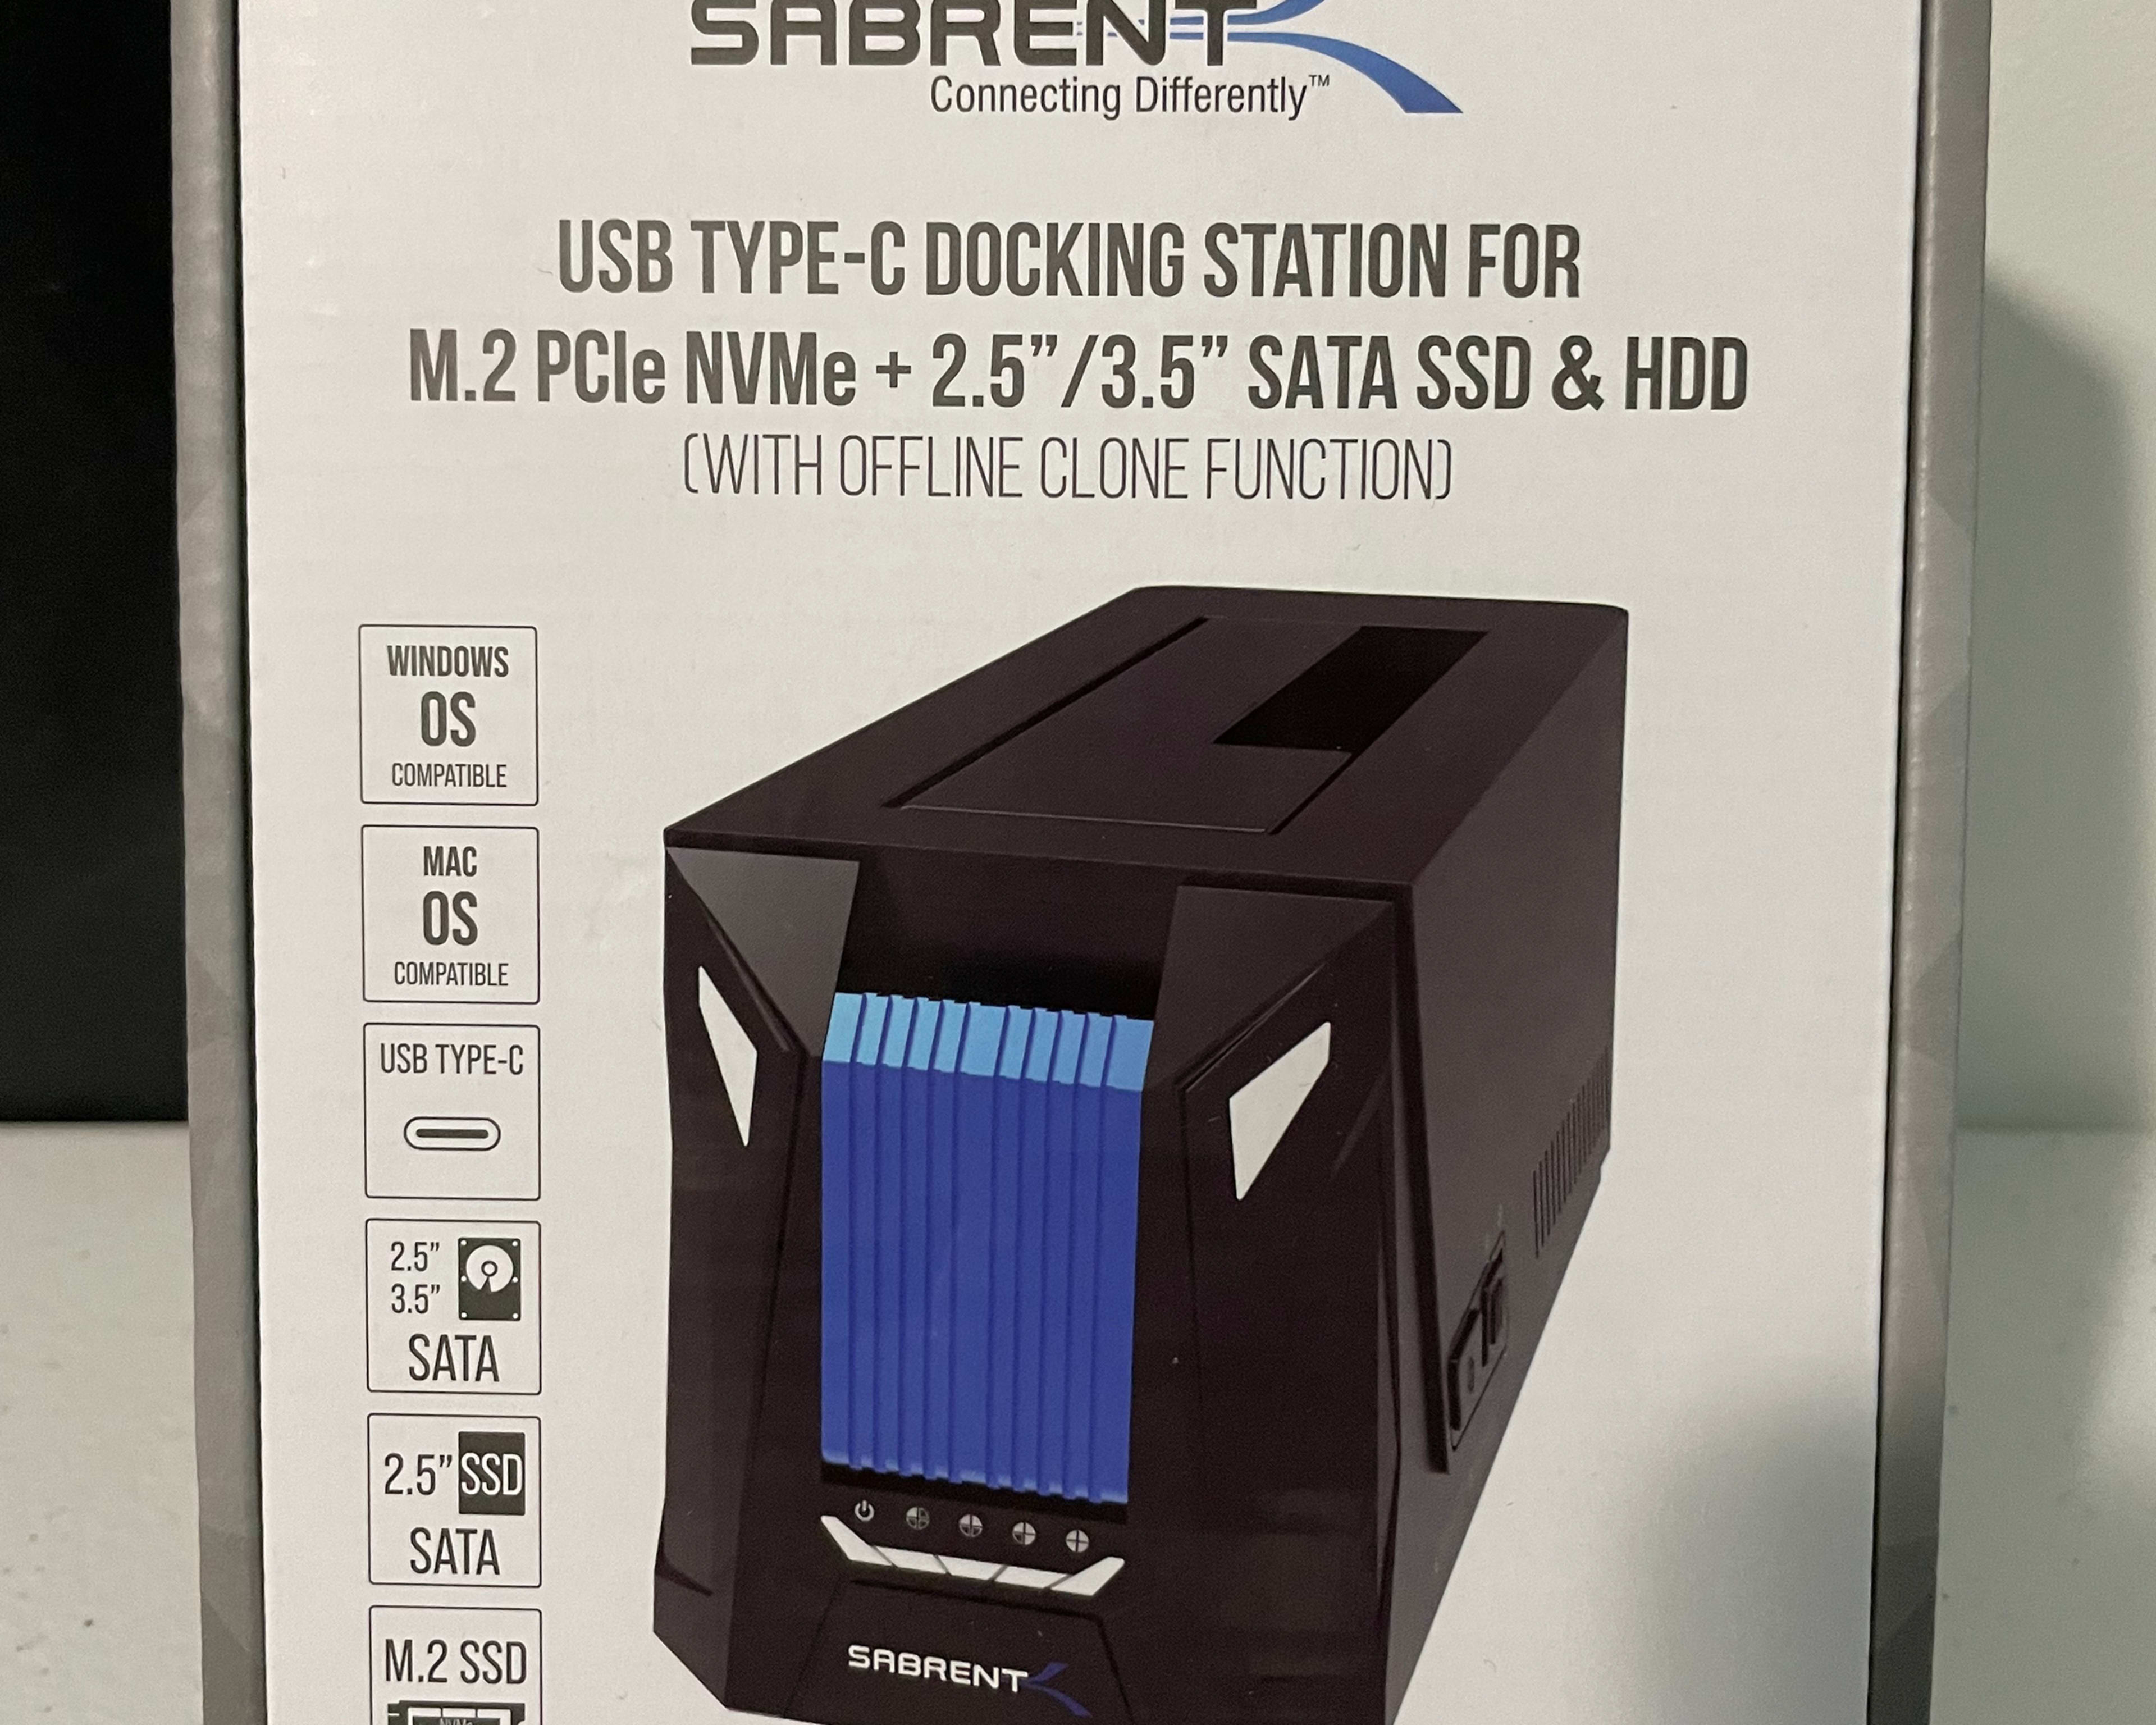 SABRENT(DS-UNHC) Docking Station: M.2 PCIe/NVMe & SATA 2.5/3.5-Inch SSD/HDD